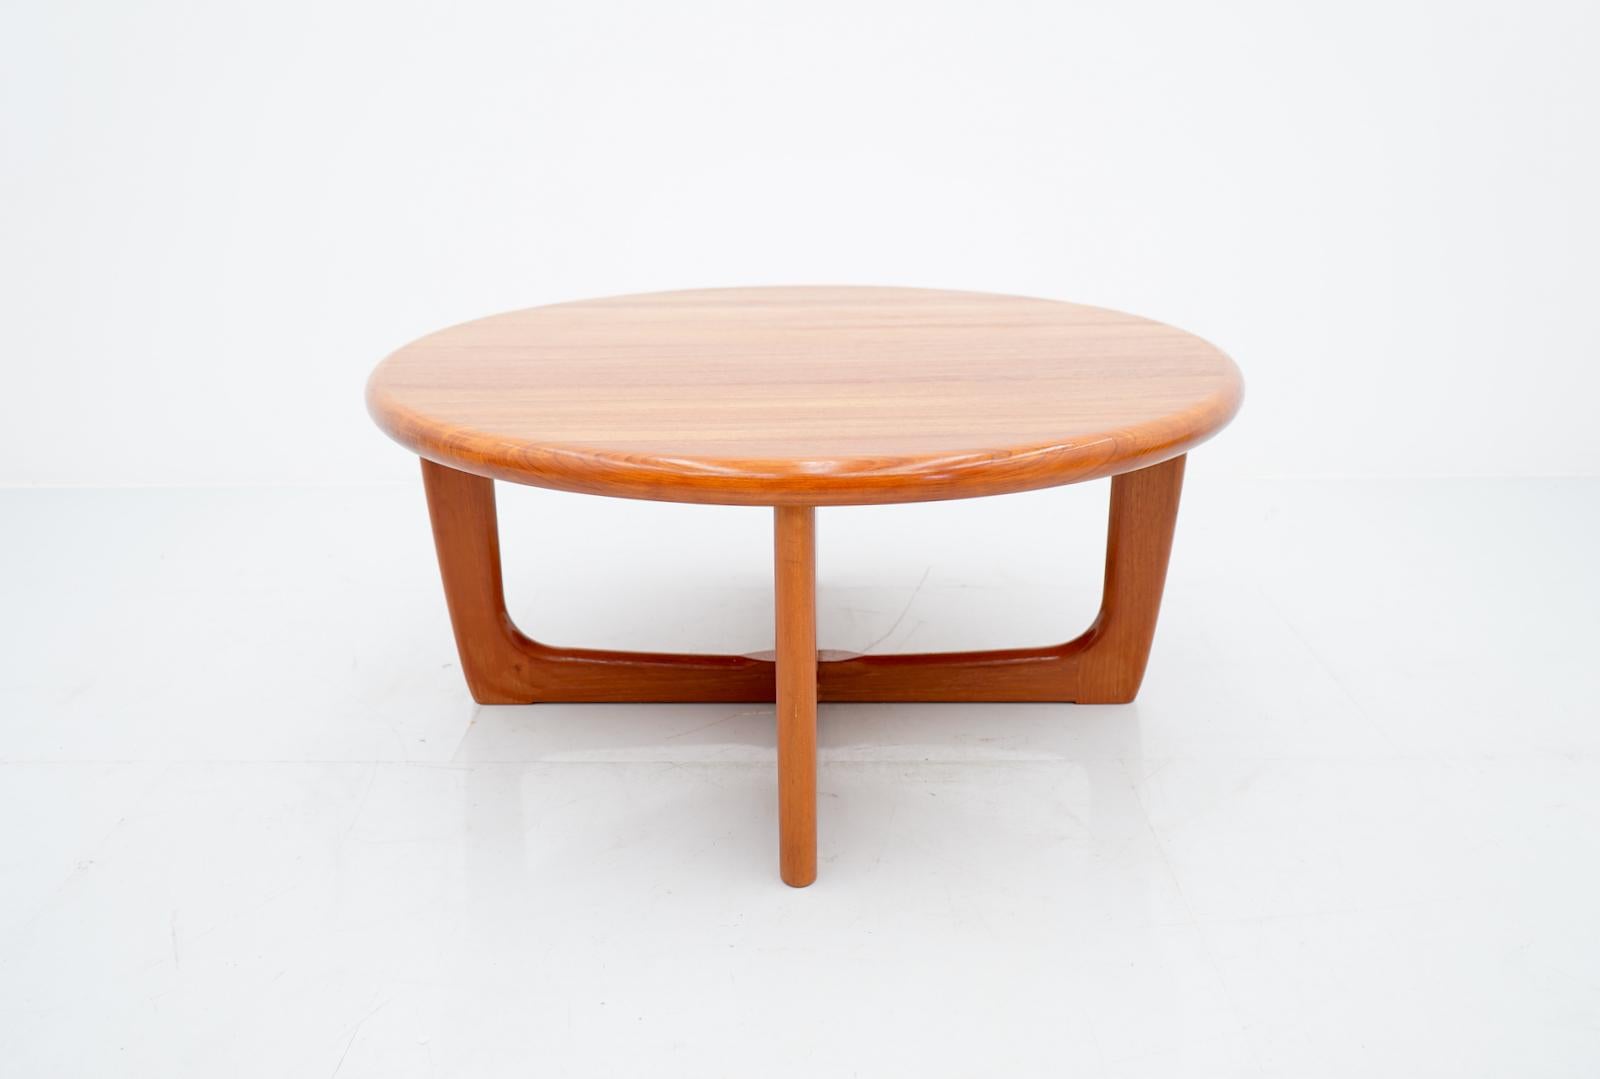 Round Niels Bach Coffee Table, Denmark 1970s. Solid teakwood. 
Very good condition.